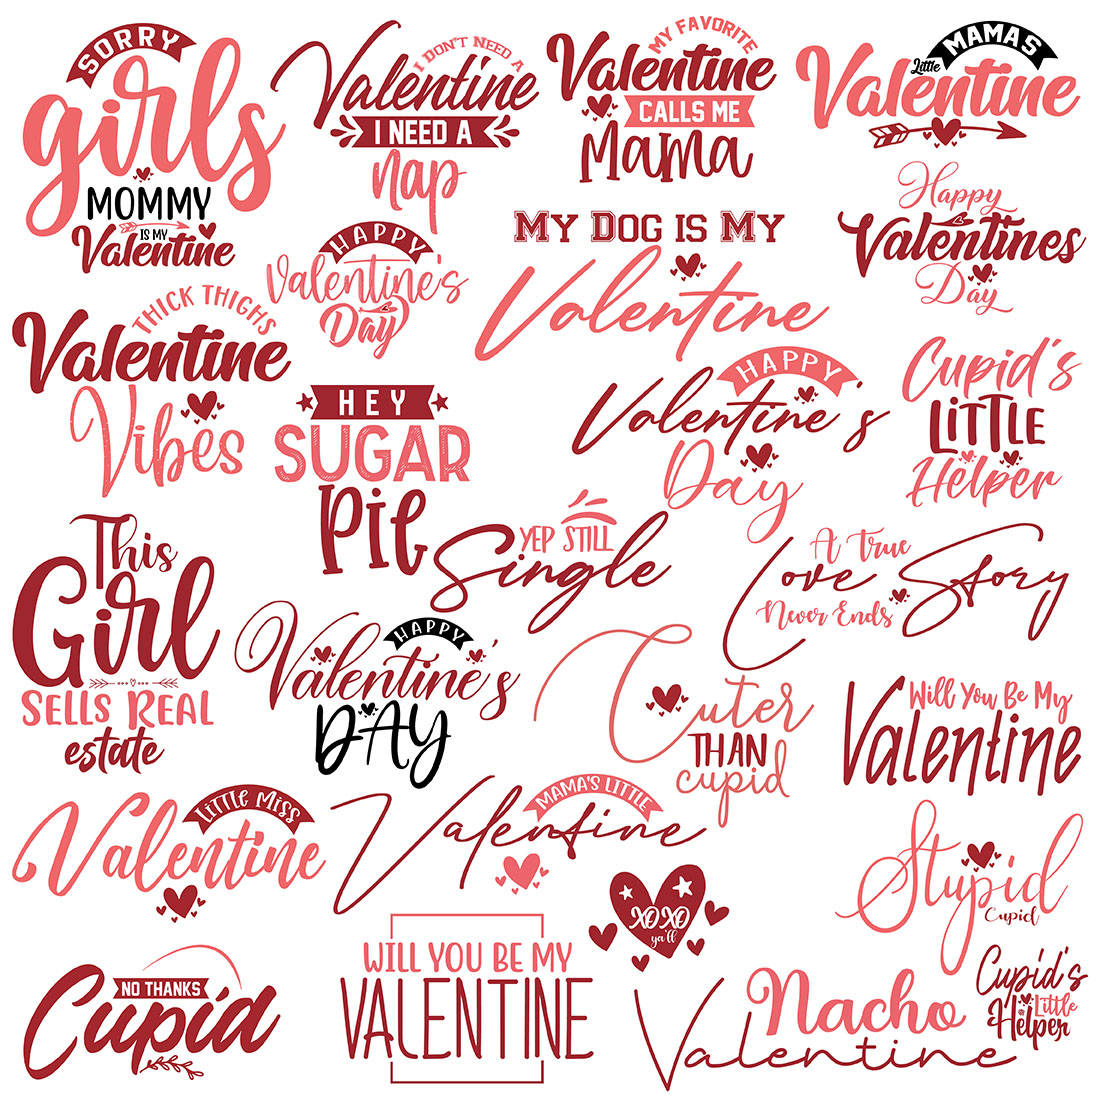 Set of colorful images for prints on the theme of Valentines Day